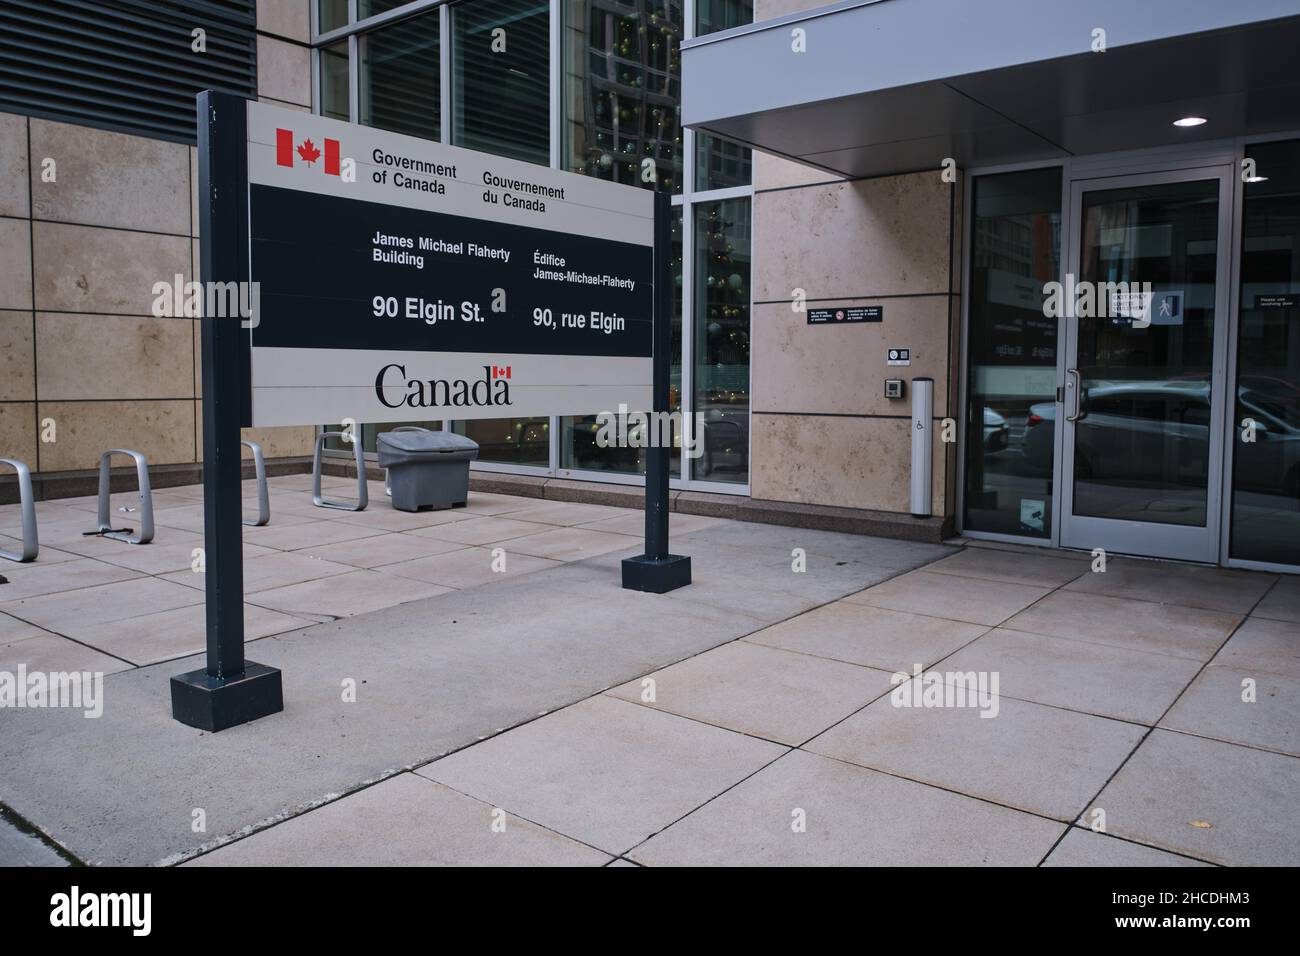 Ottawa, Ontario, Canada - November 14, 2021: A Government of Canada sign at the James Michael Flaherty Building, housing the Department of Finance. Stock Photo